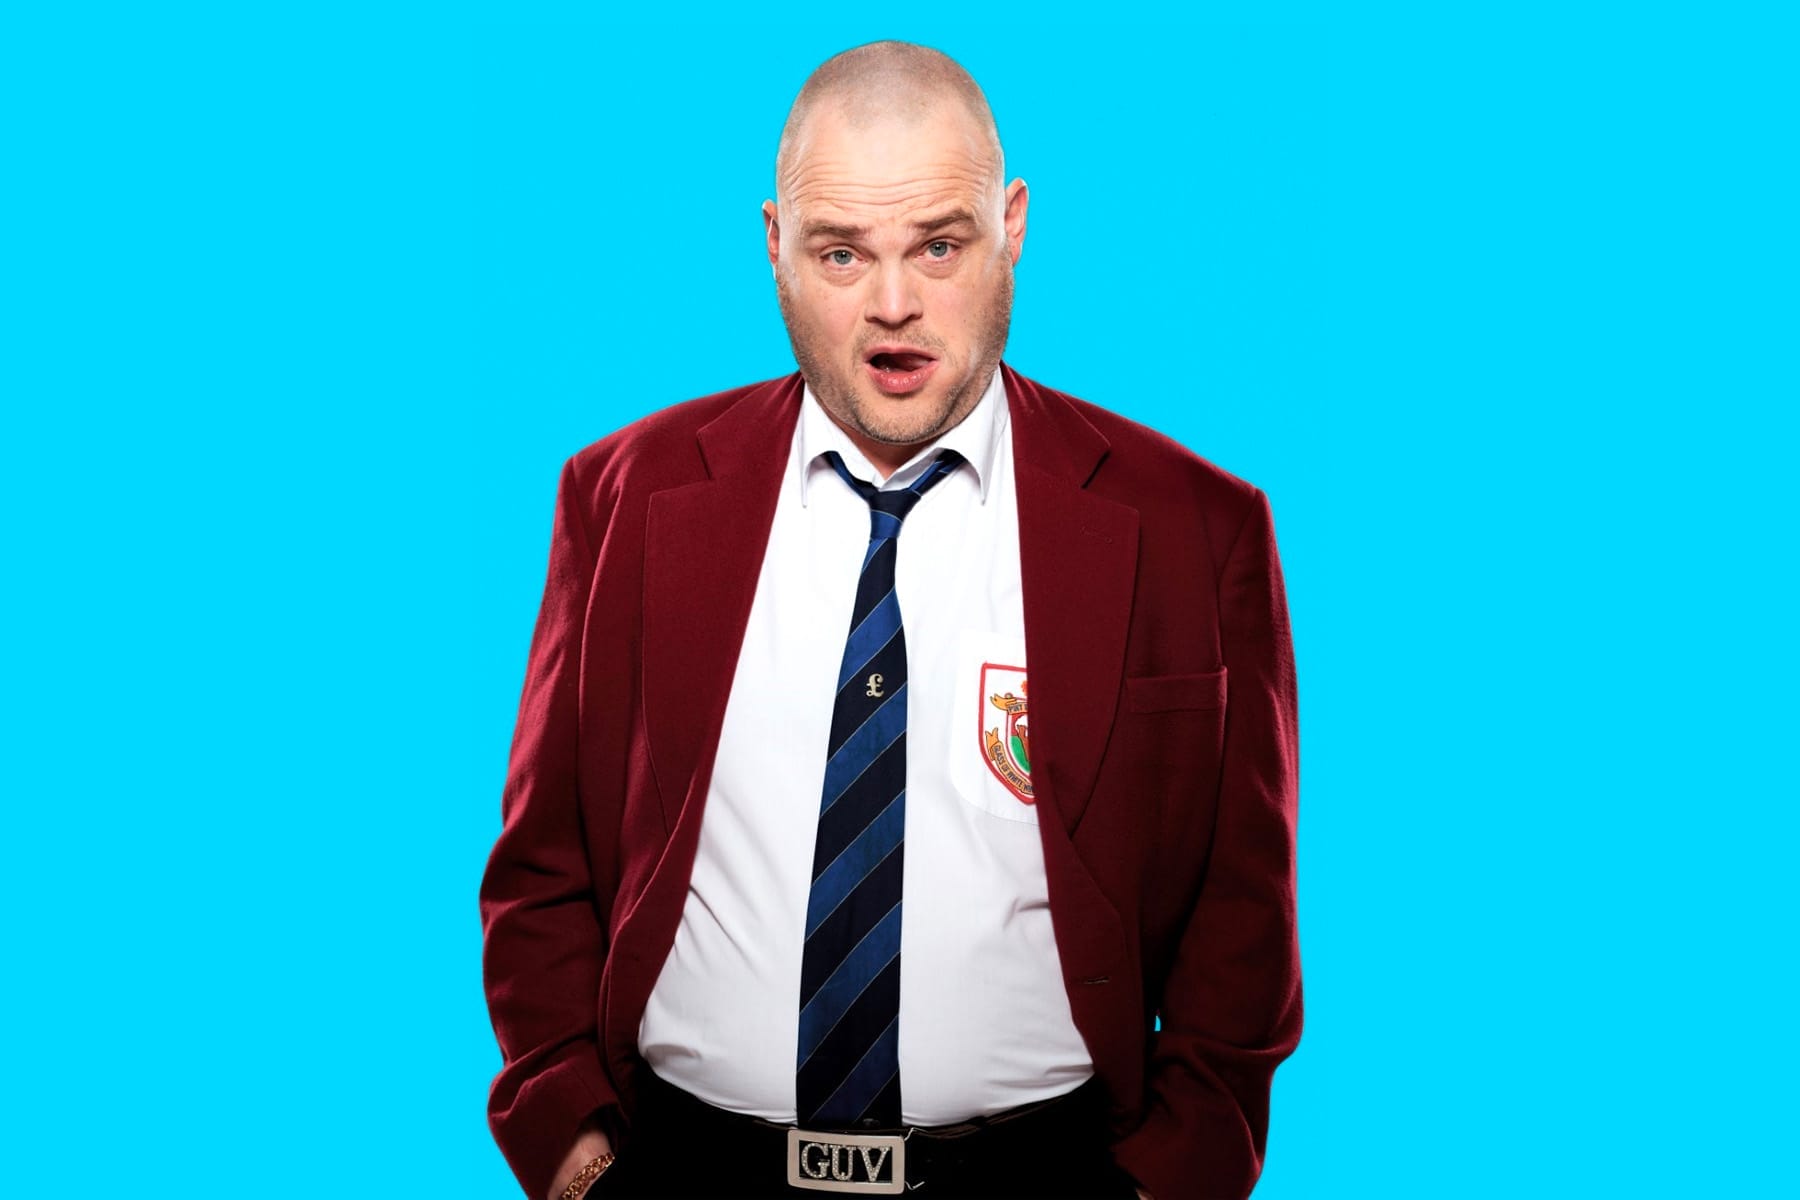 Comedian Al Murray poses in a maroon blazer and striped school tie. His belt is bedazzled with the word 'GUV'. Behind him is a vibrant blue background.